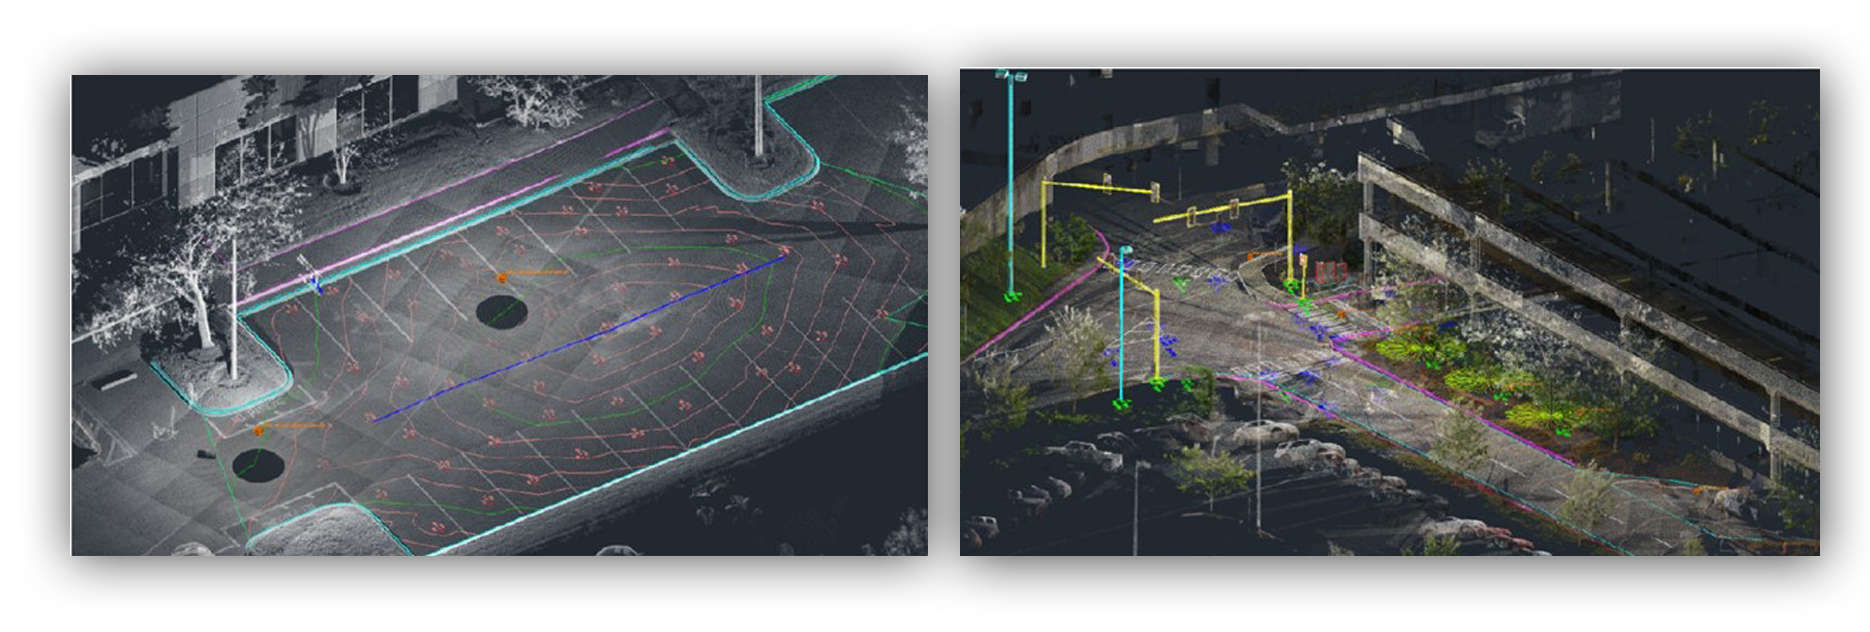 Why AEC industries are quickly adopting 3D laser scanning2-2